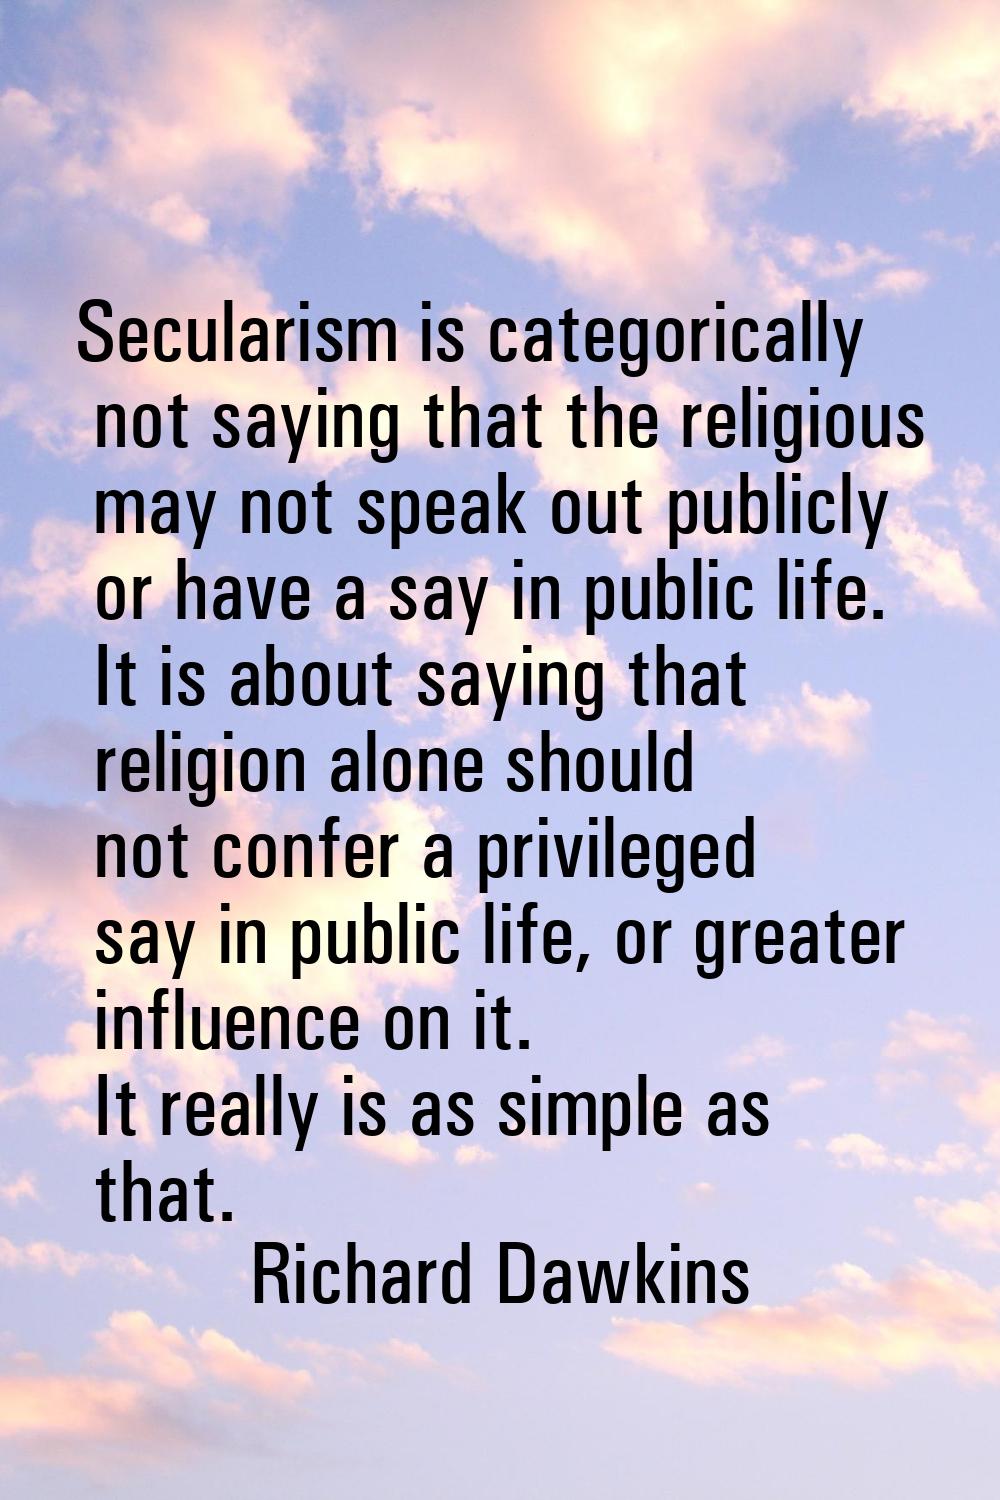 Secularism is categorically not saying that the religious may not speak out publicly or have a say 